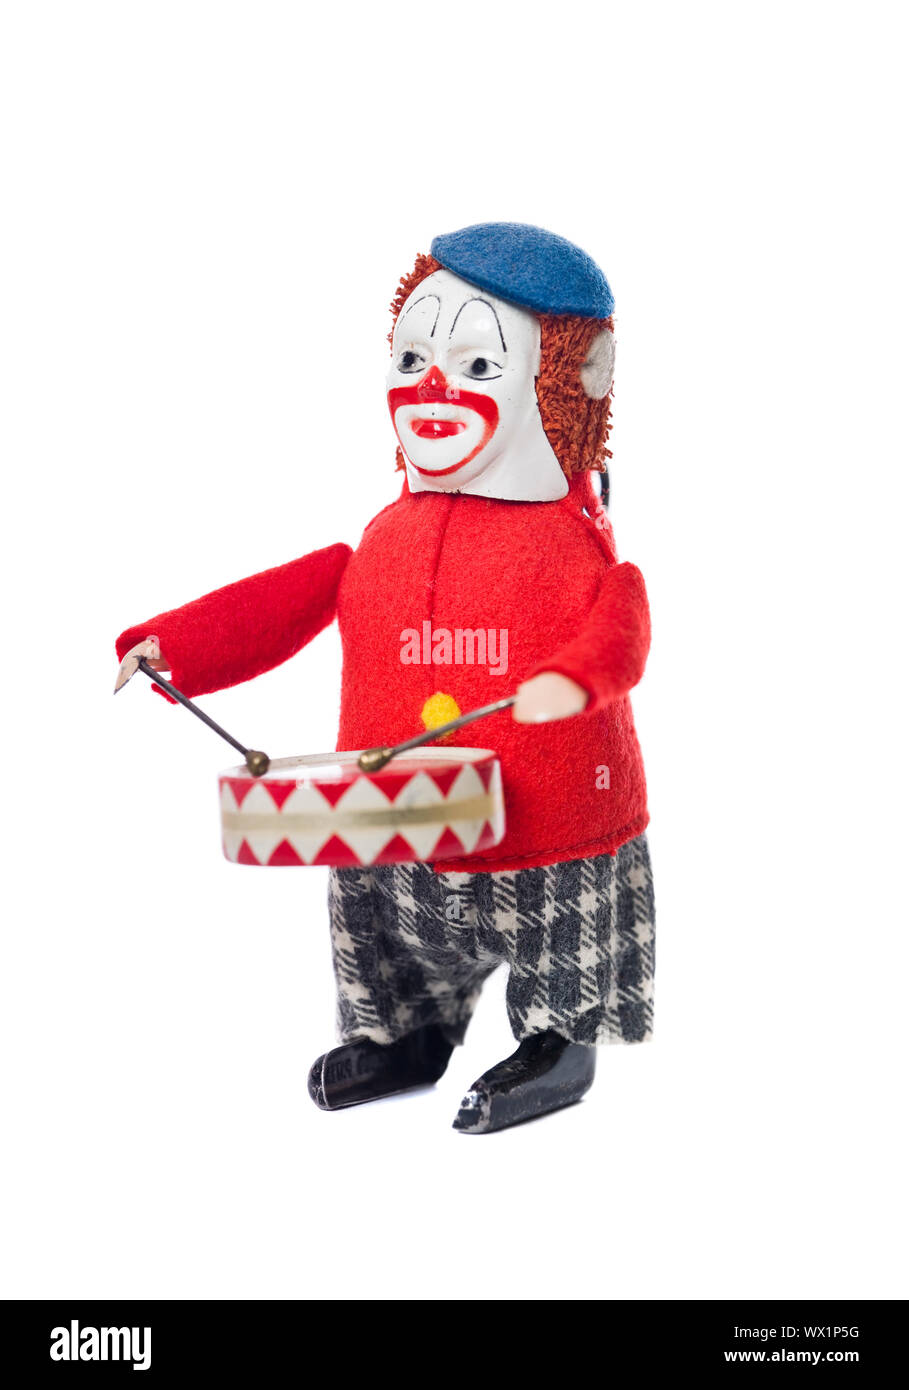 Toy Clown with drums Stock Photo